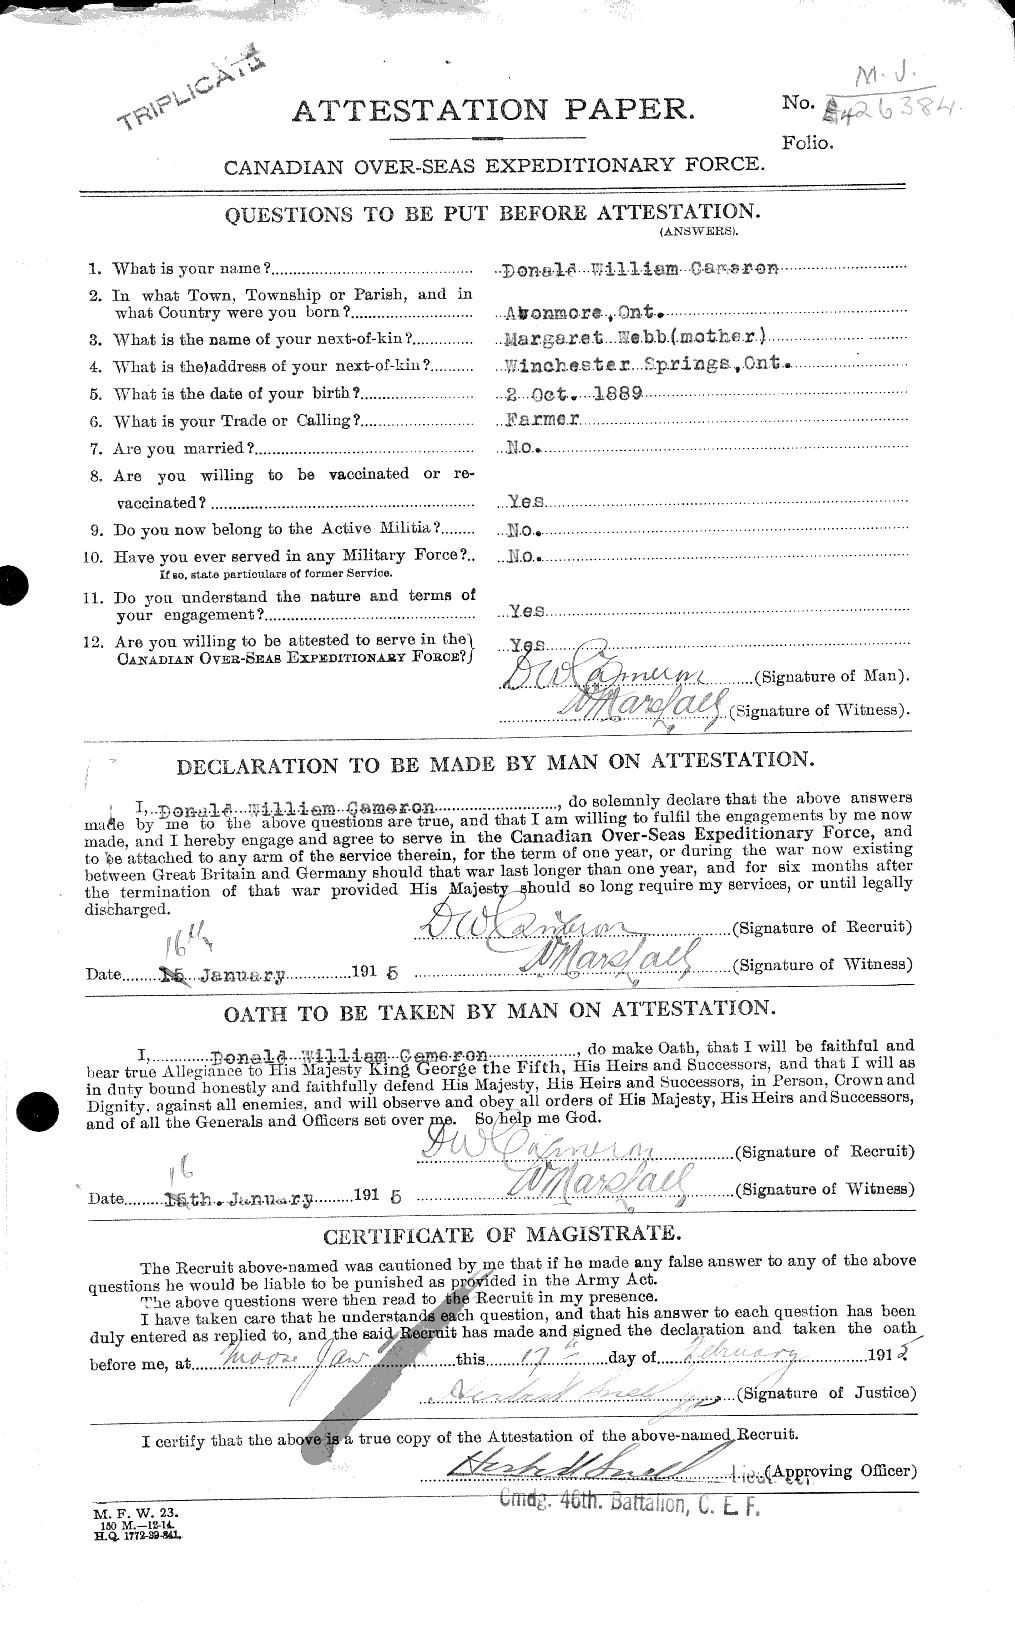 Personnel Records of the First World War - CEF 002096a